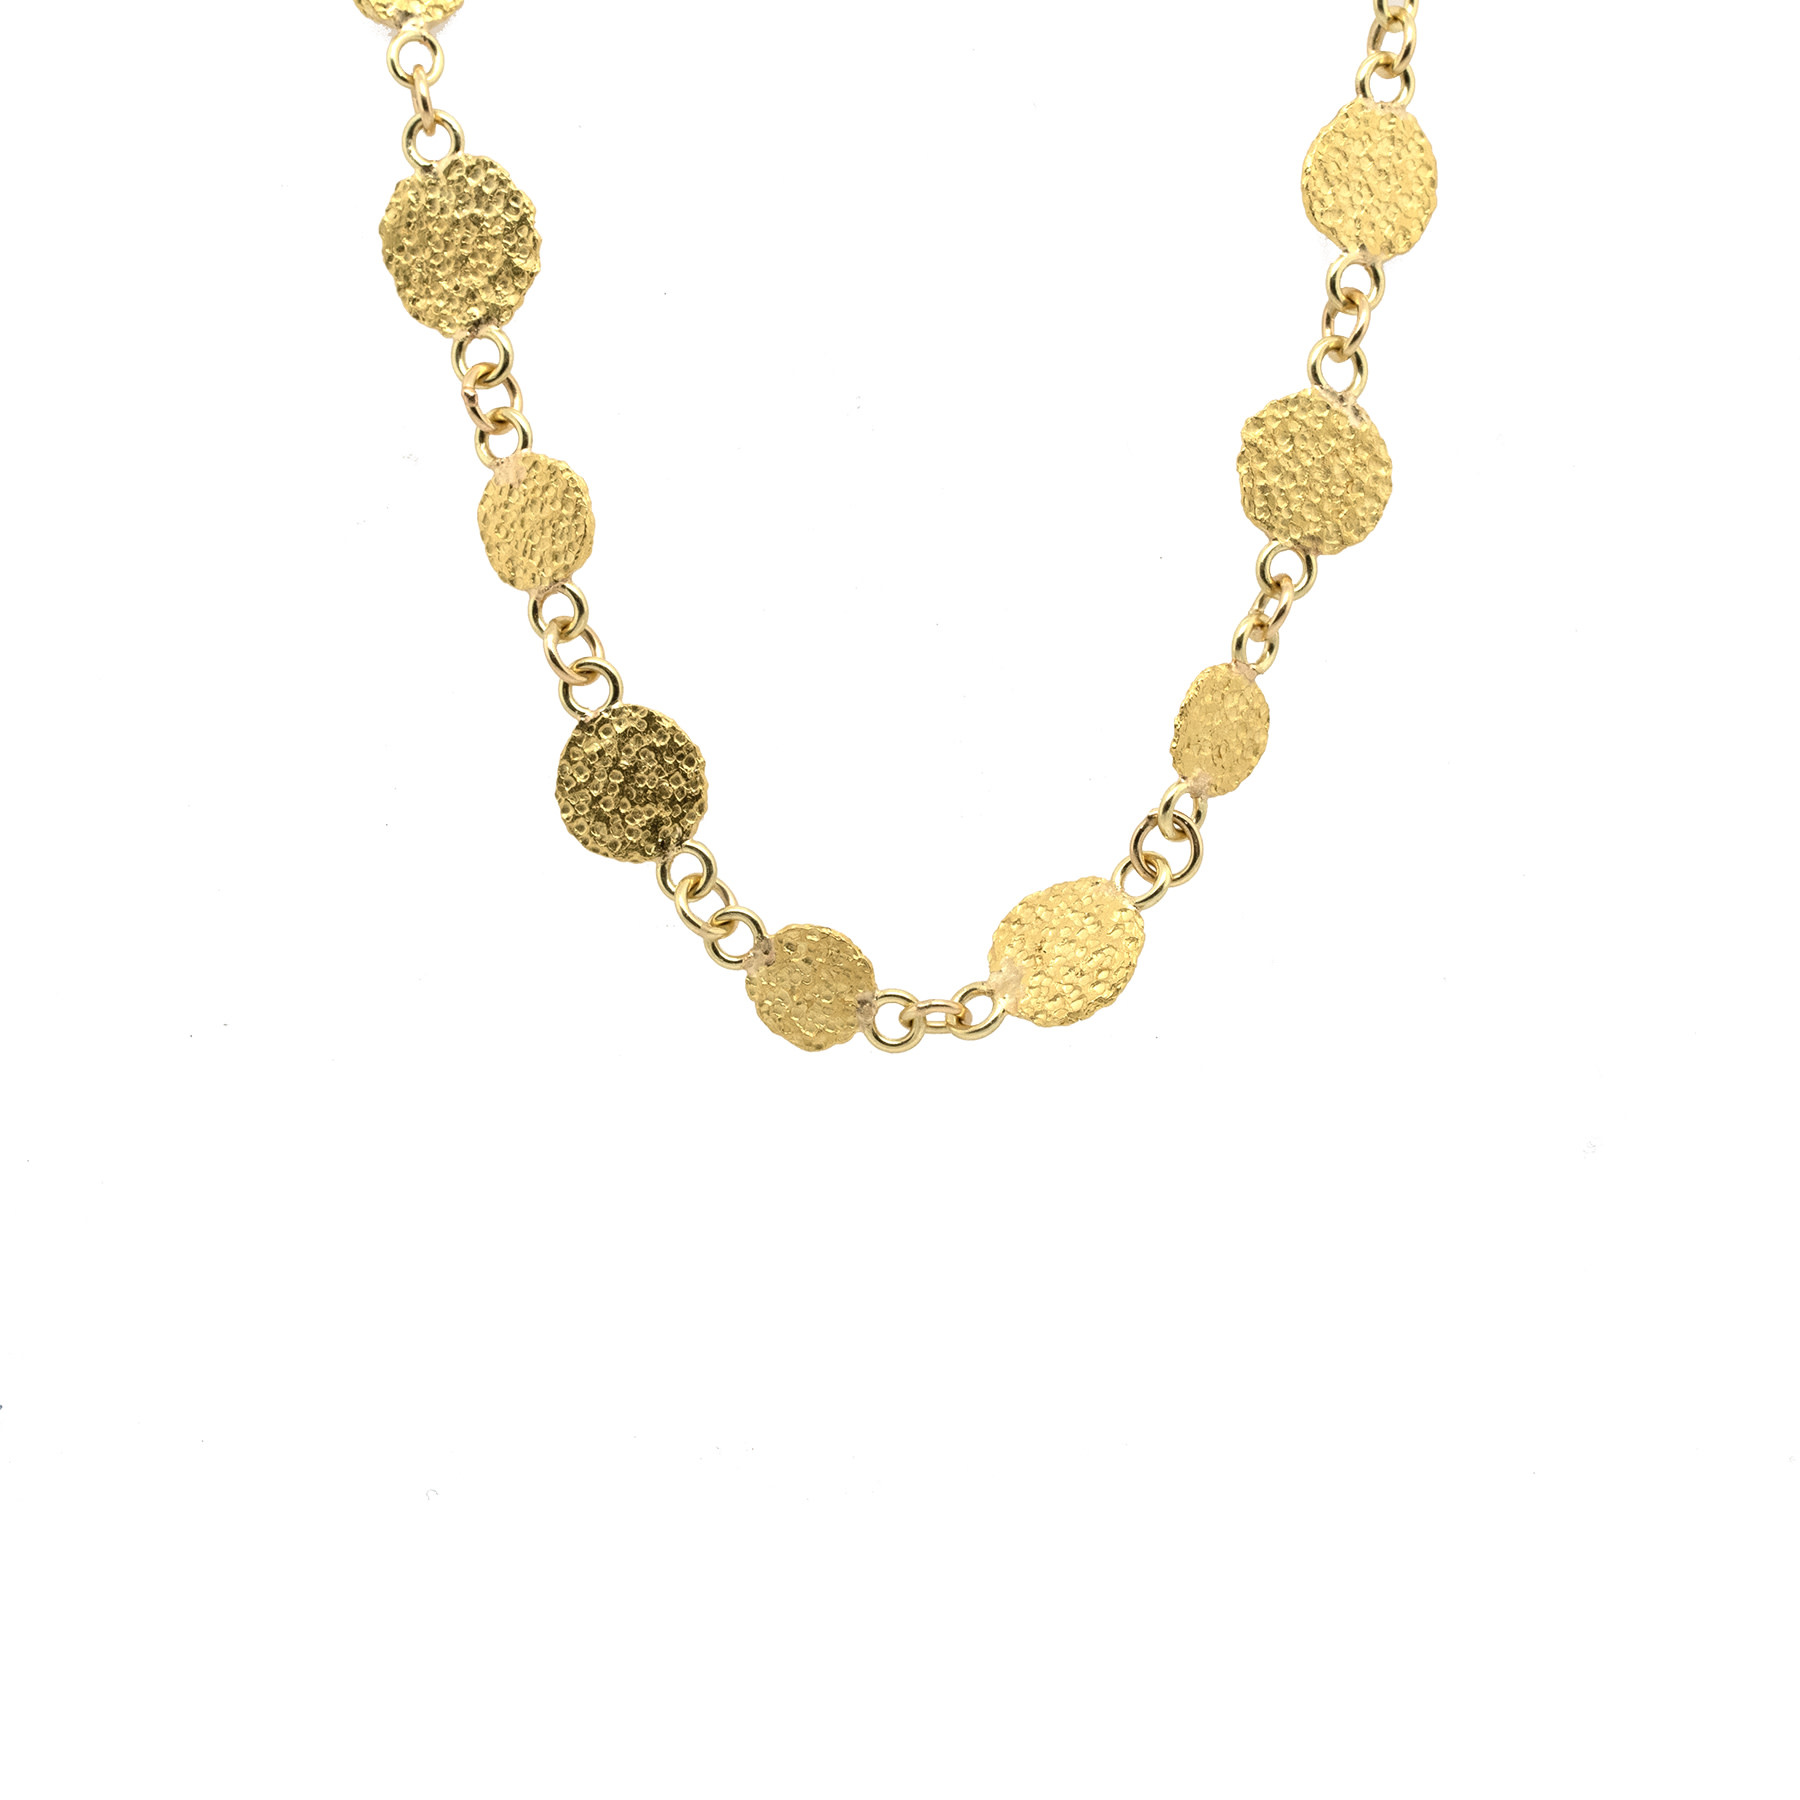 Gold Silk Textured Platelet Necklace - Element 79 Contemporary Jewelry